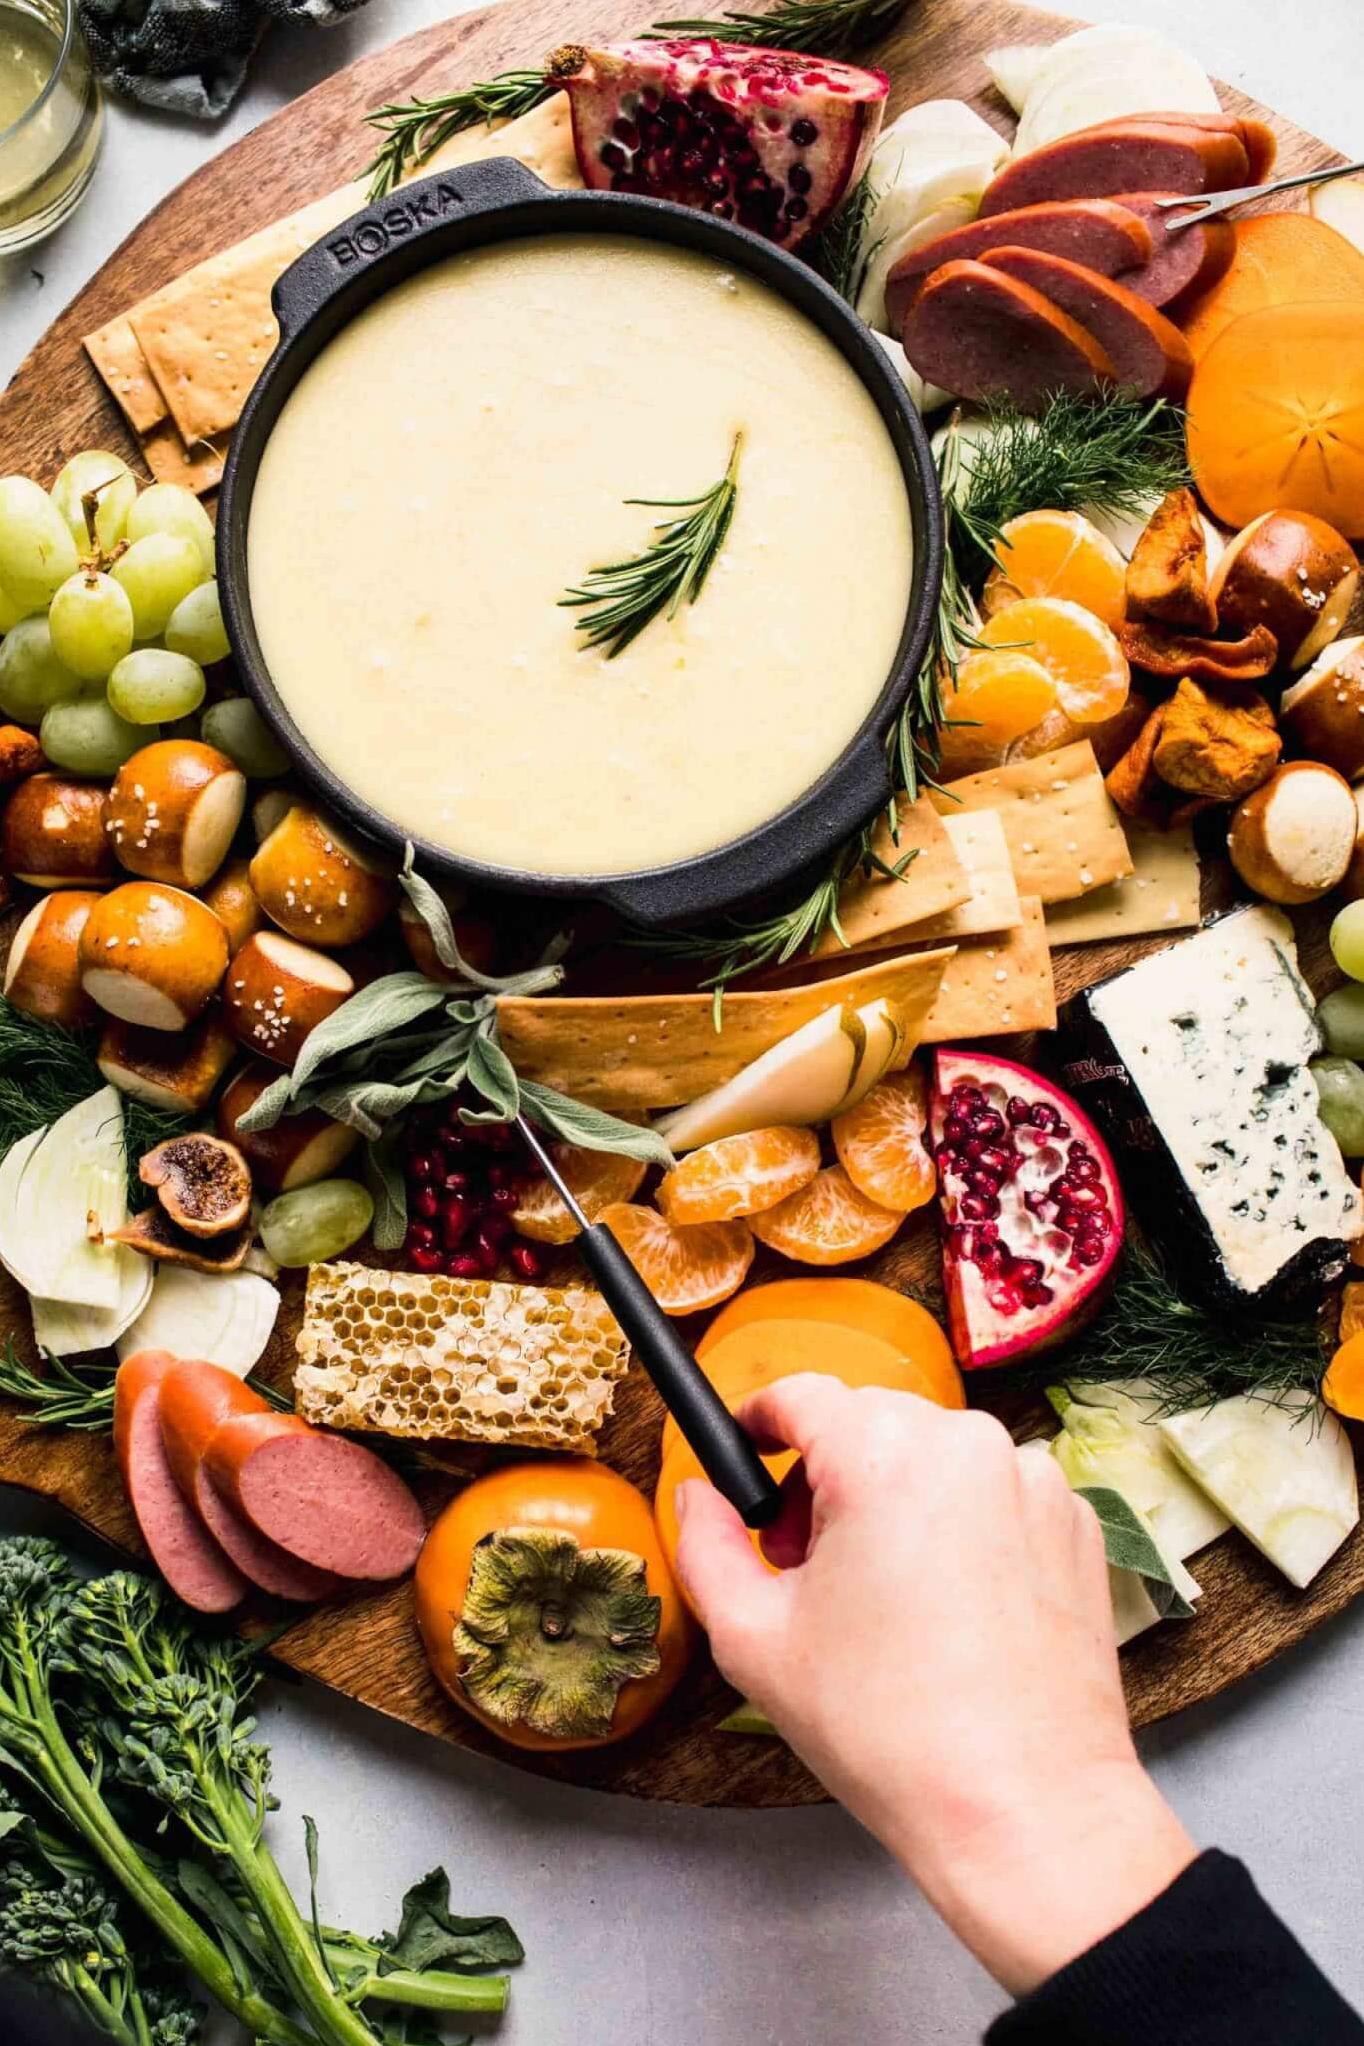  The melting pot of cheese and wine is the perfect combination for a cozy night in with friends or family.